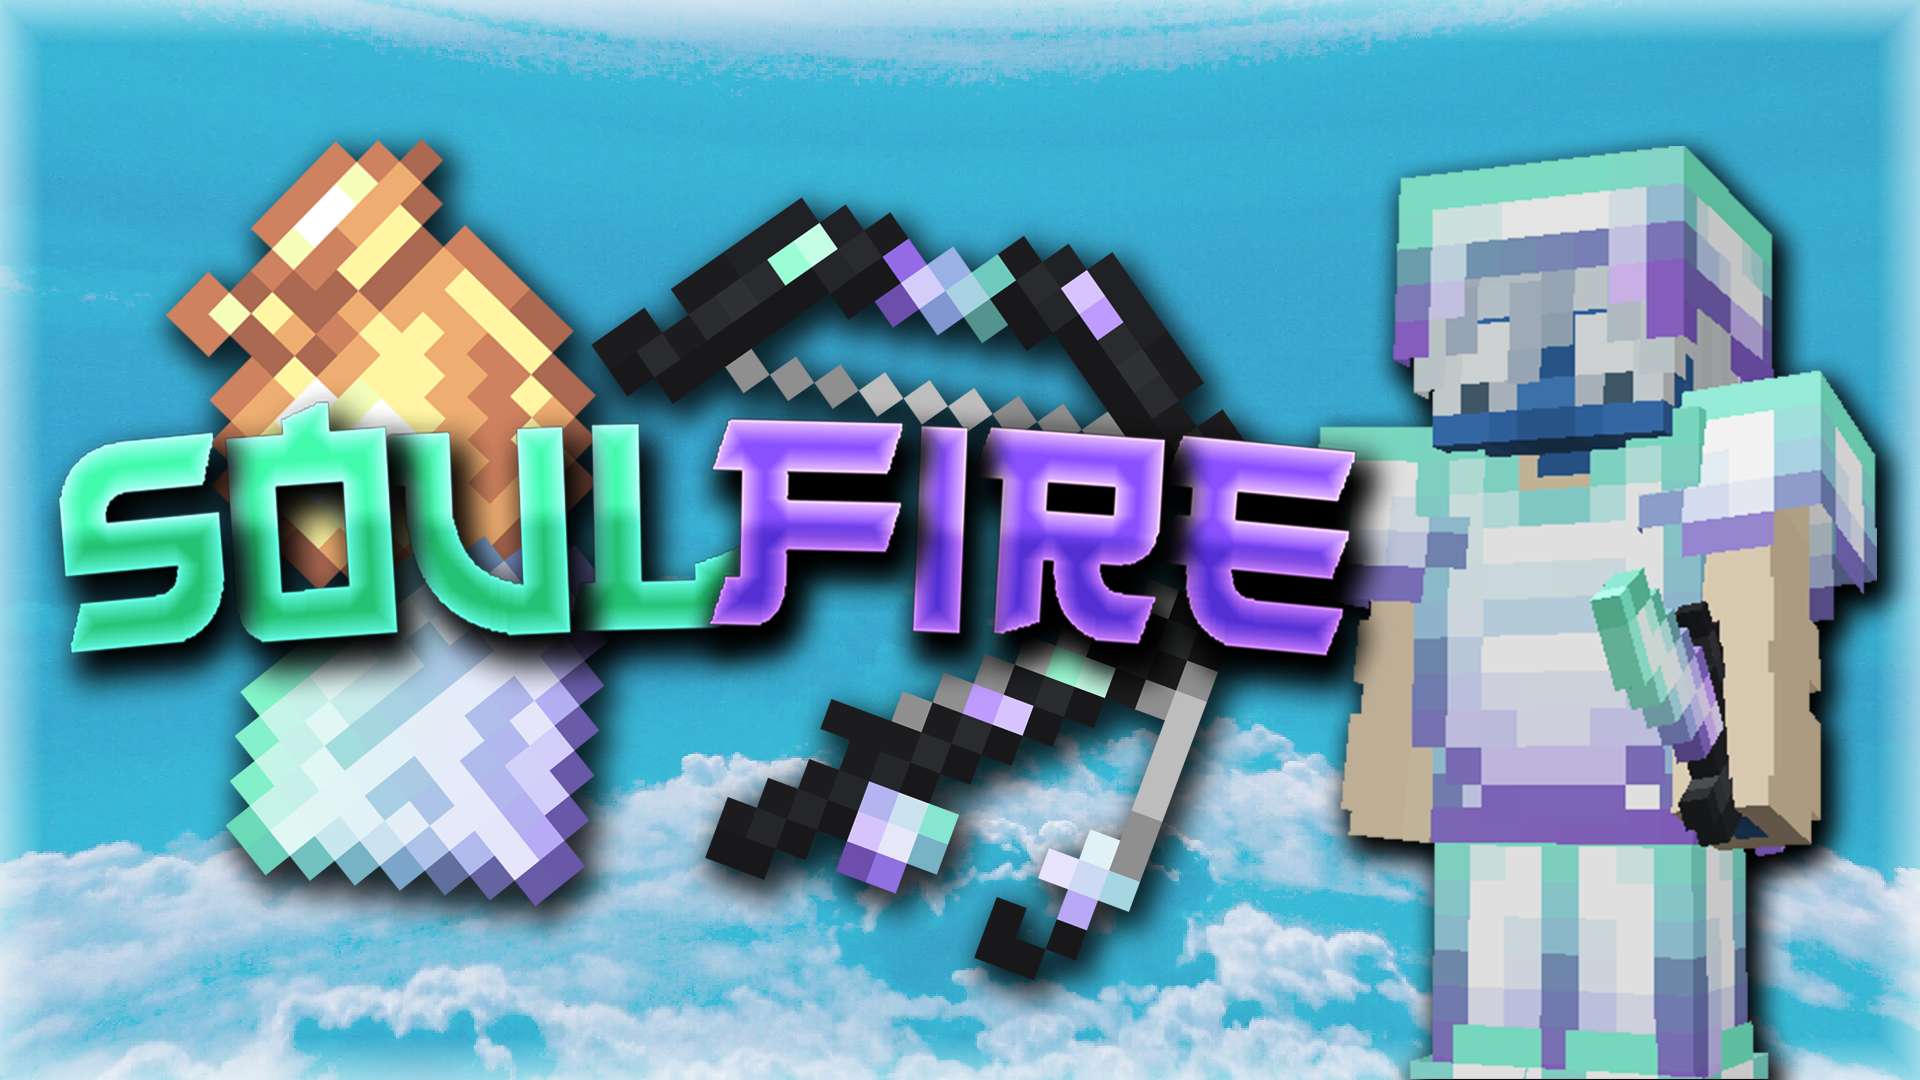 SoulFire 16x by reiKo & MrKrqbs on PvPRP